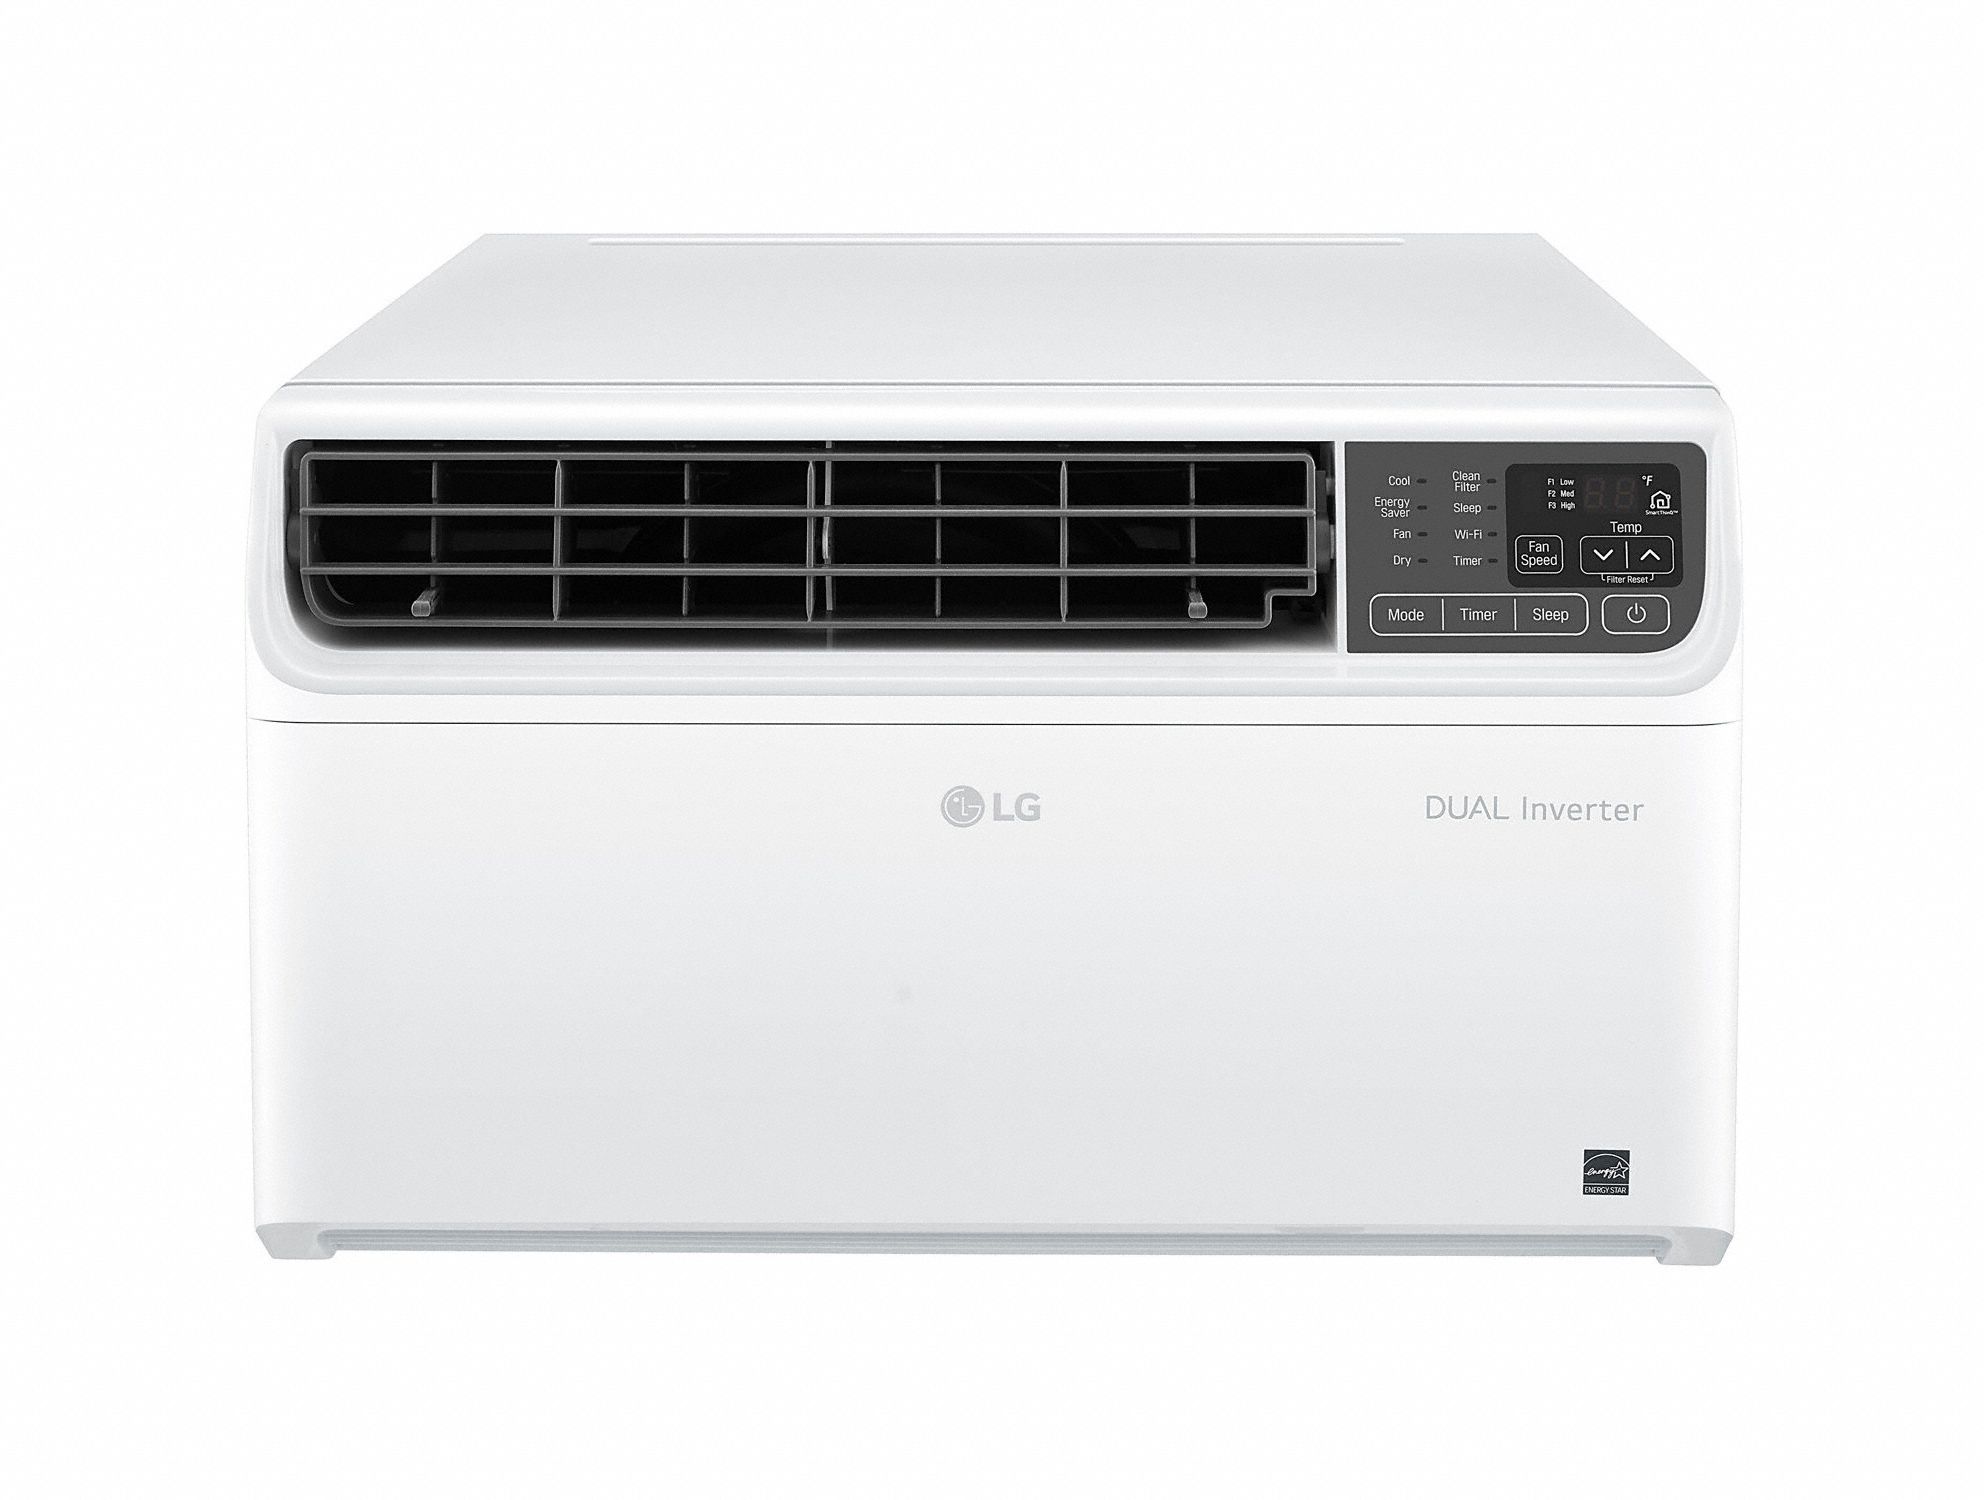 Window Air Conditioner: 9,500 BtuH, 350 to 400 sq ft, 12 1/2 in H x 19 1/2 in W